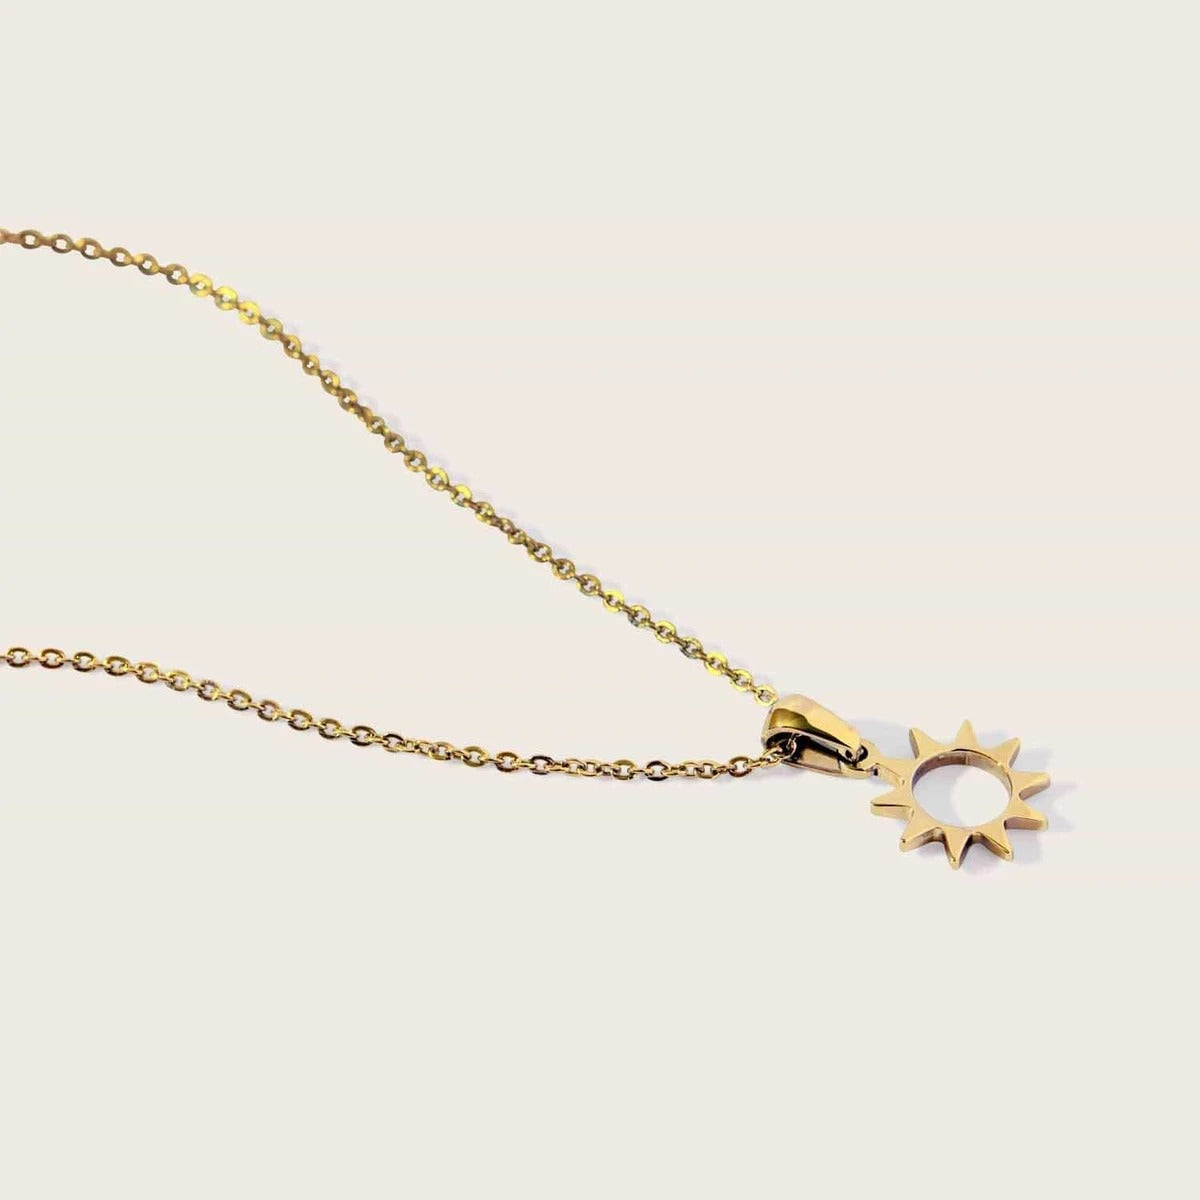 Solé Necklace in Gold